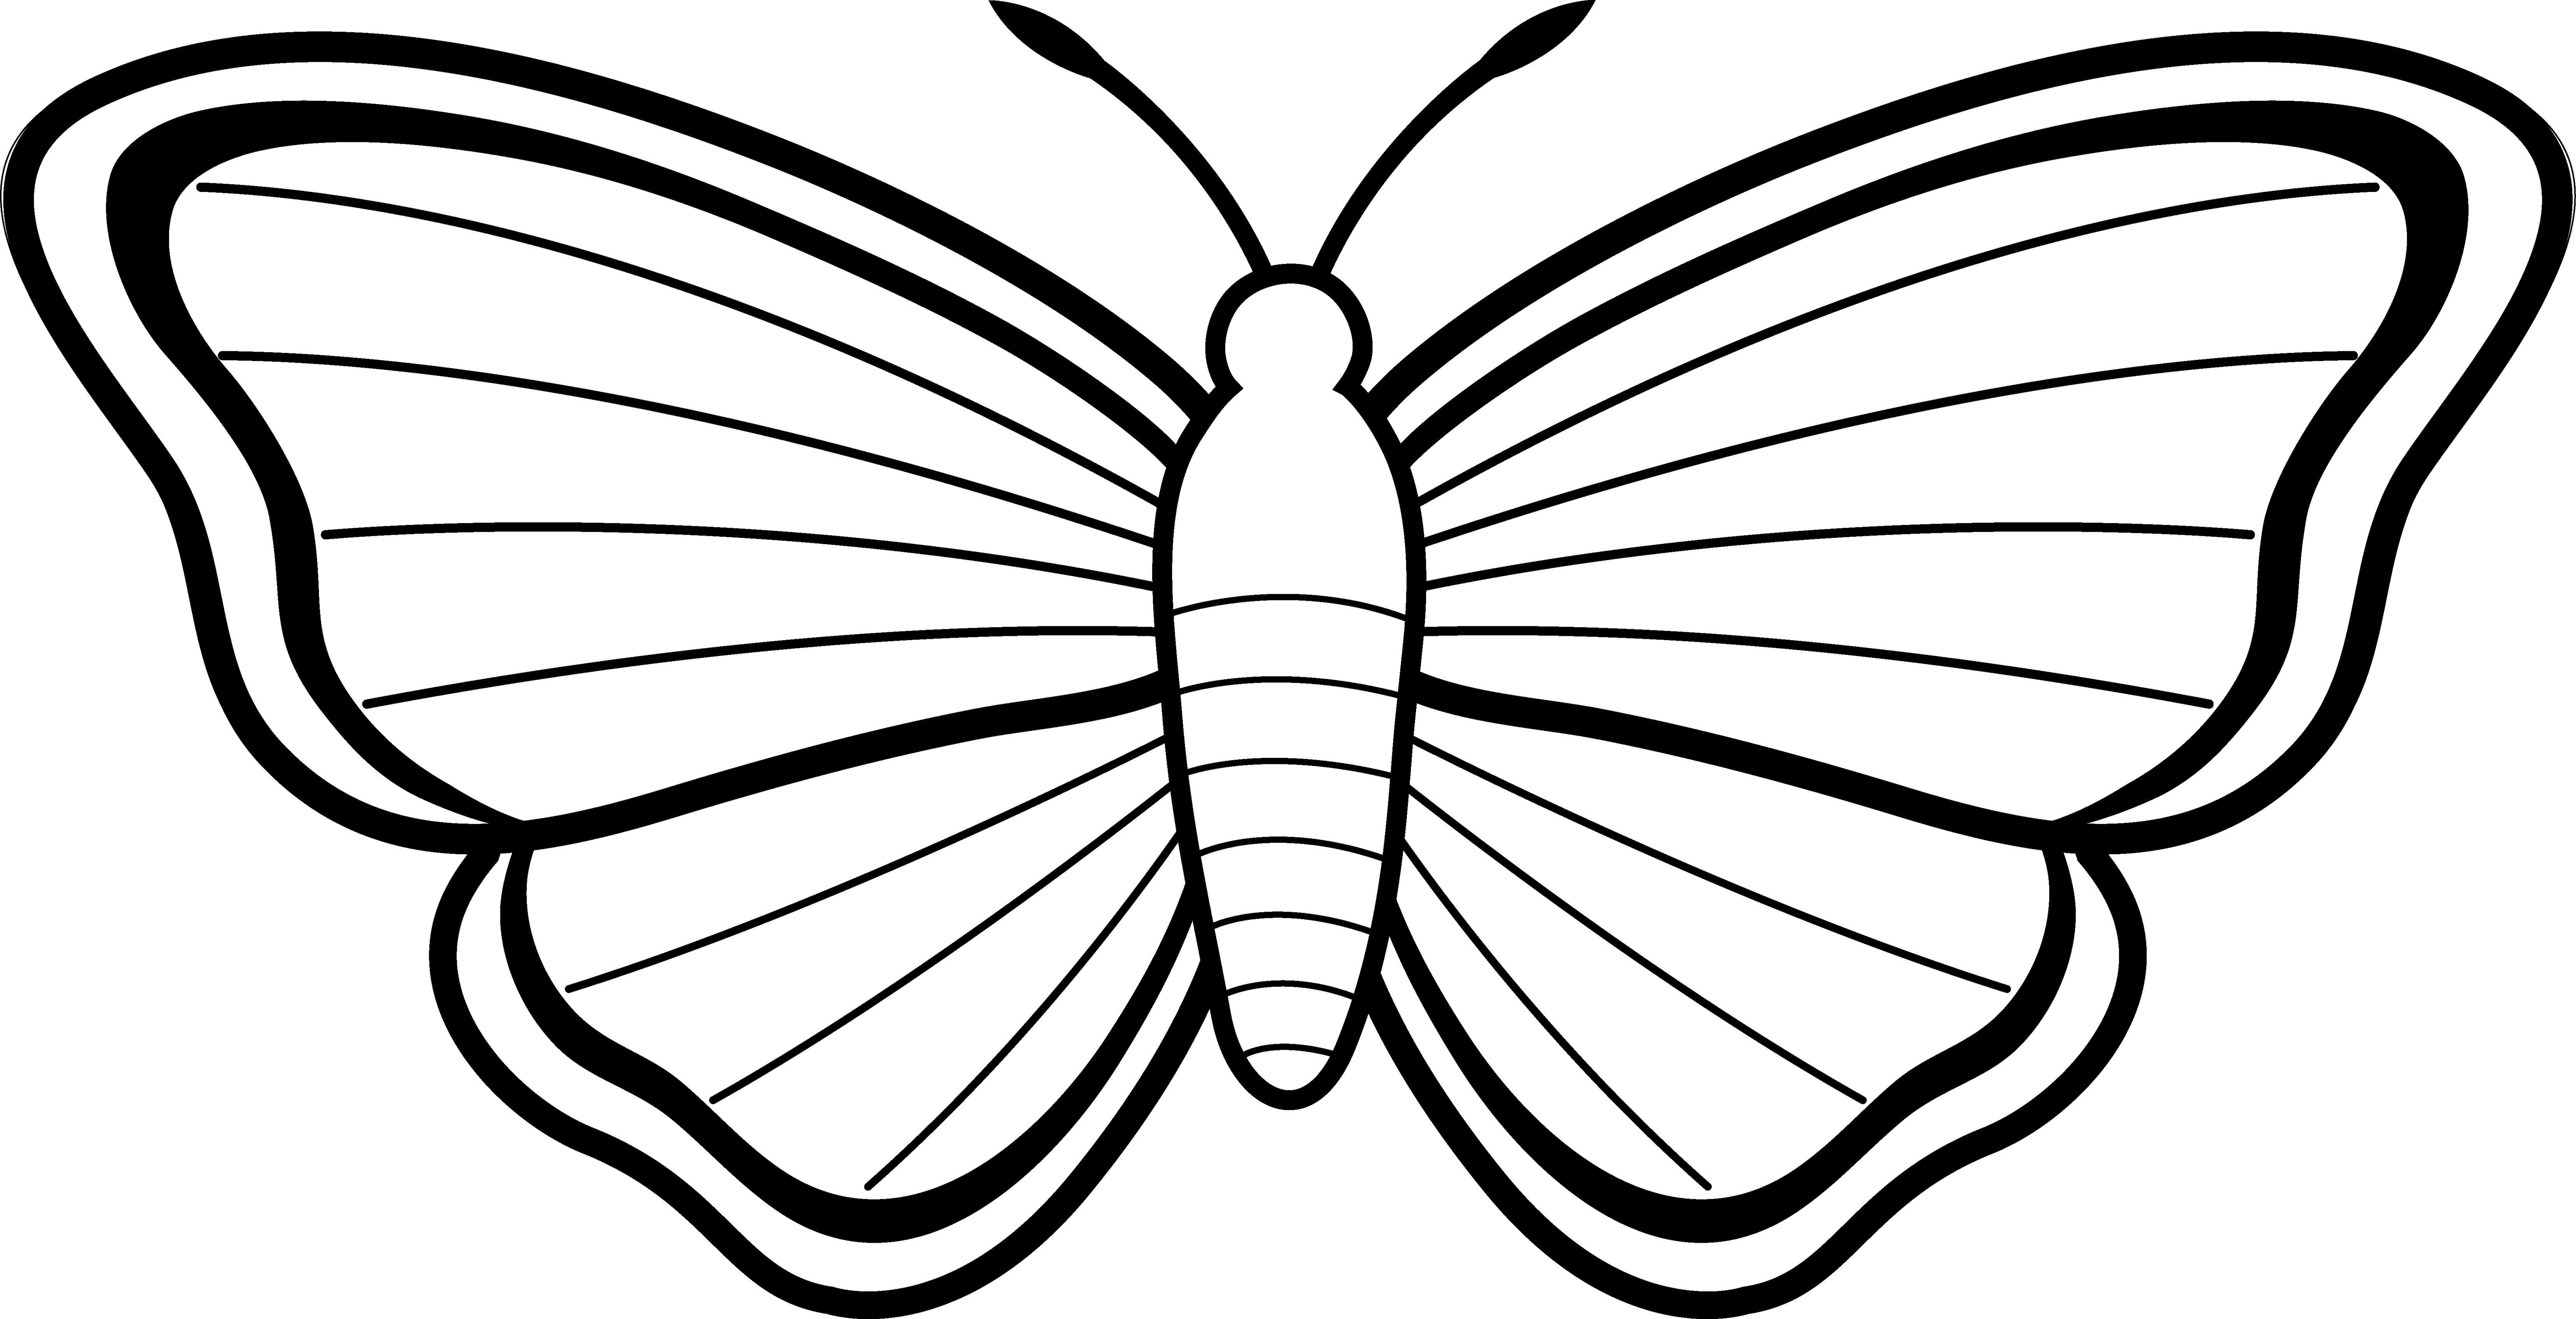 Butterfly Outline Clip Art.